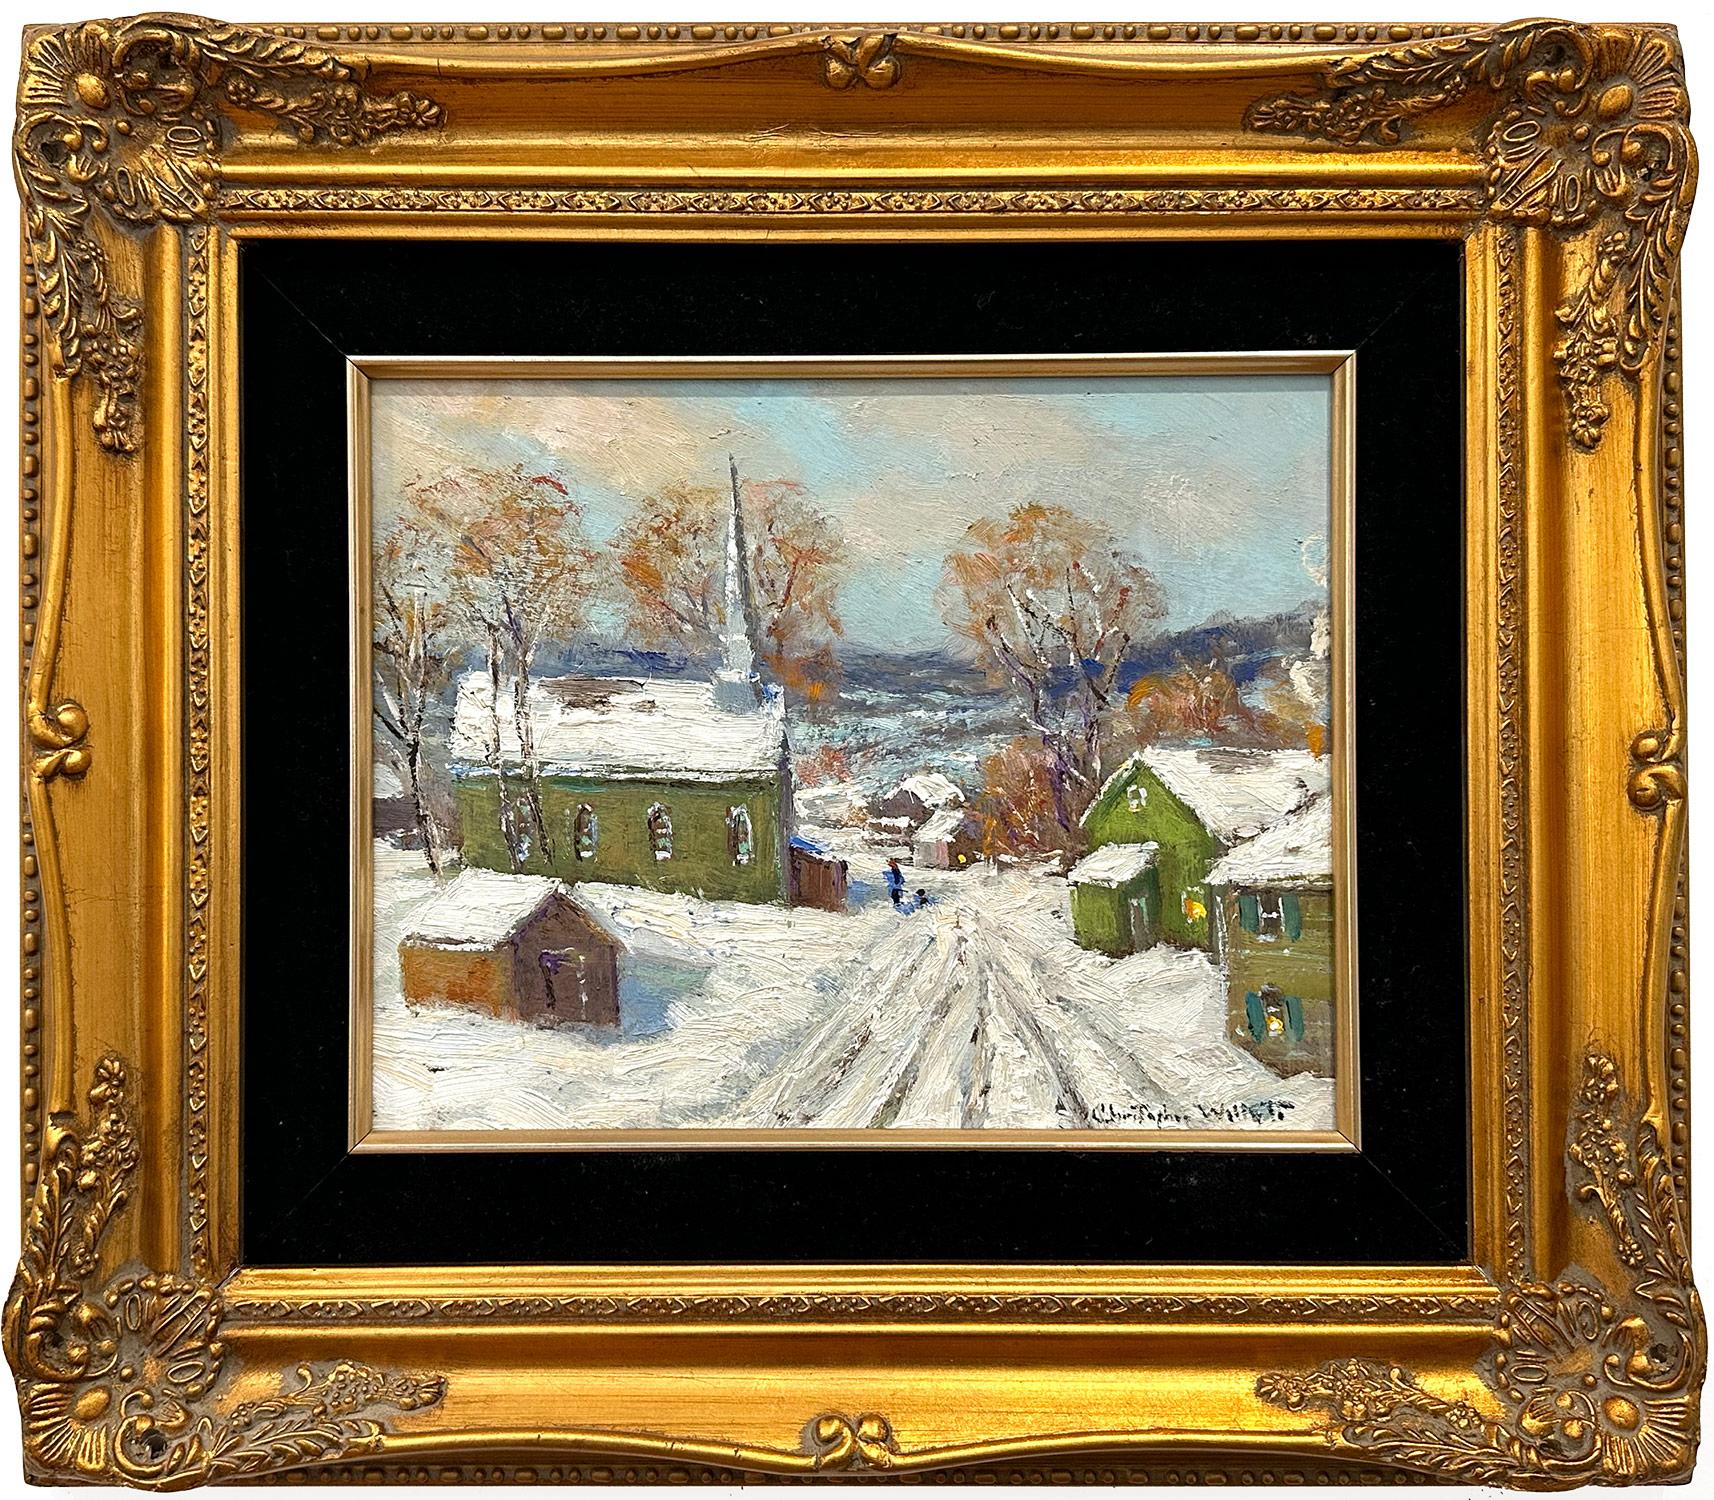 Christopher Willett Landscape Painting - "Road to Tinicum" Bucks County PA Pastoral Winter Snow Landscape Oil Painting